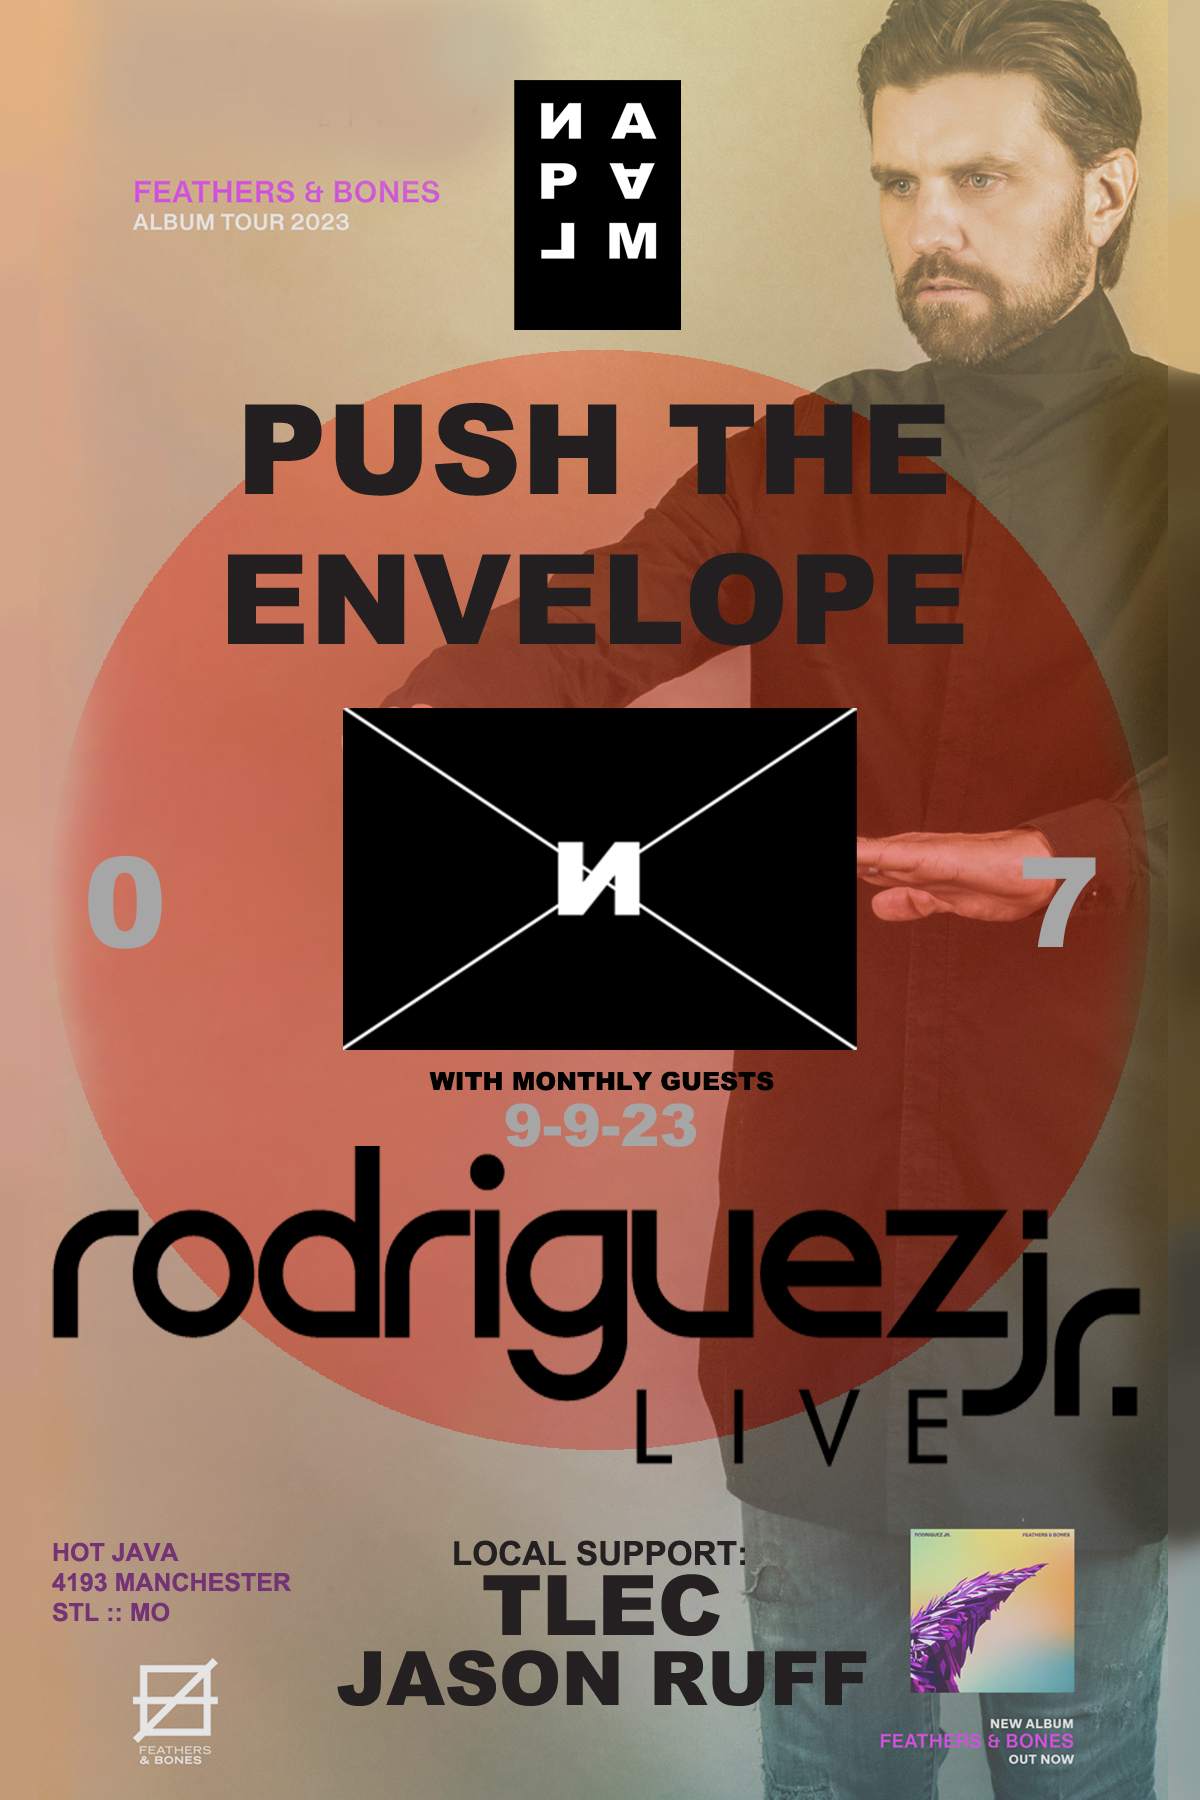 NAPALM pres Push The Envelope with Rodriguez Jr. (LIVE) - フライヤー表